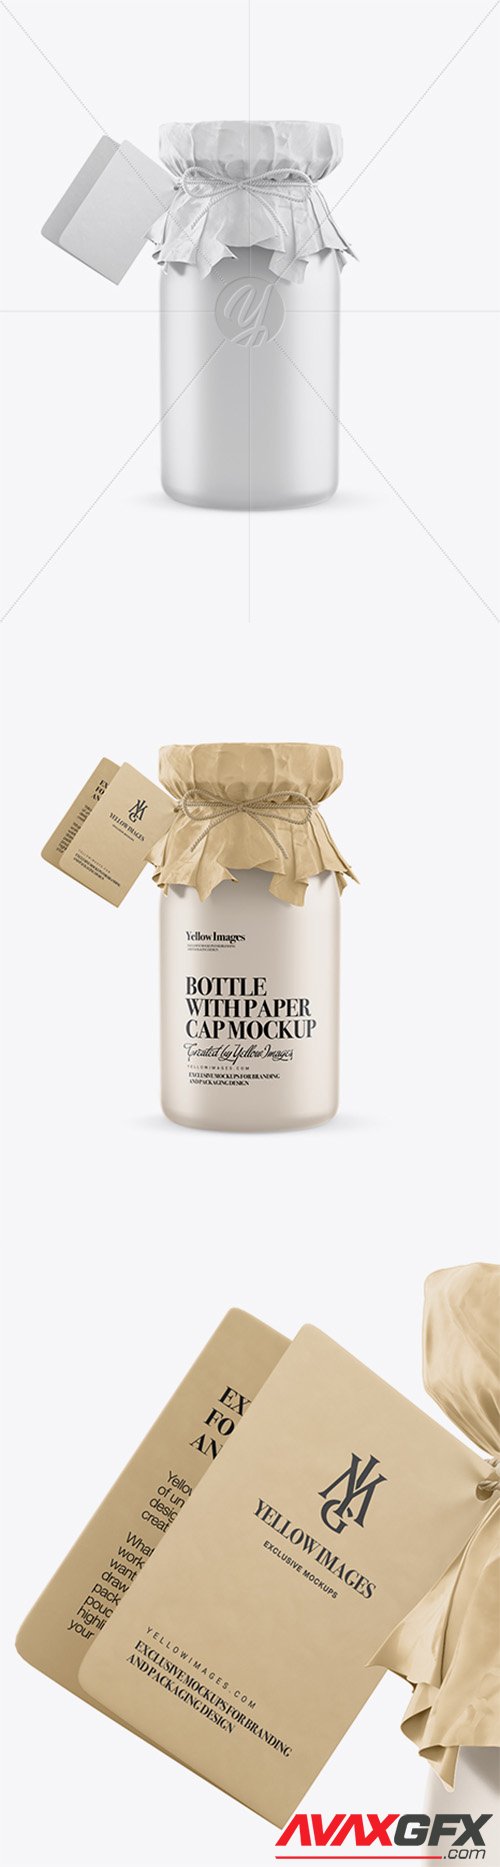 Matte Bottle with Paper Cap and Tag Mockup 23506